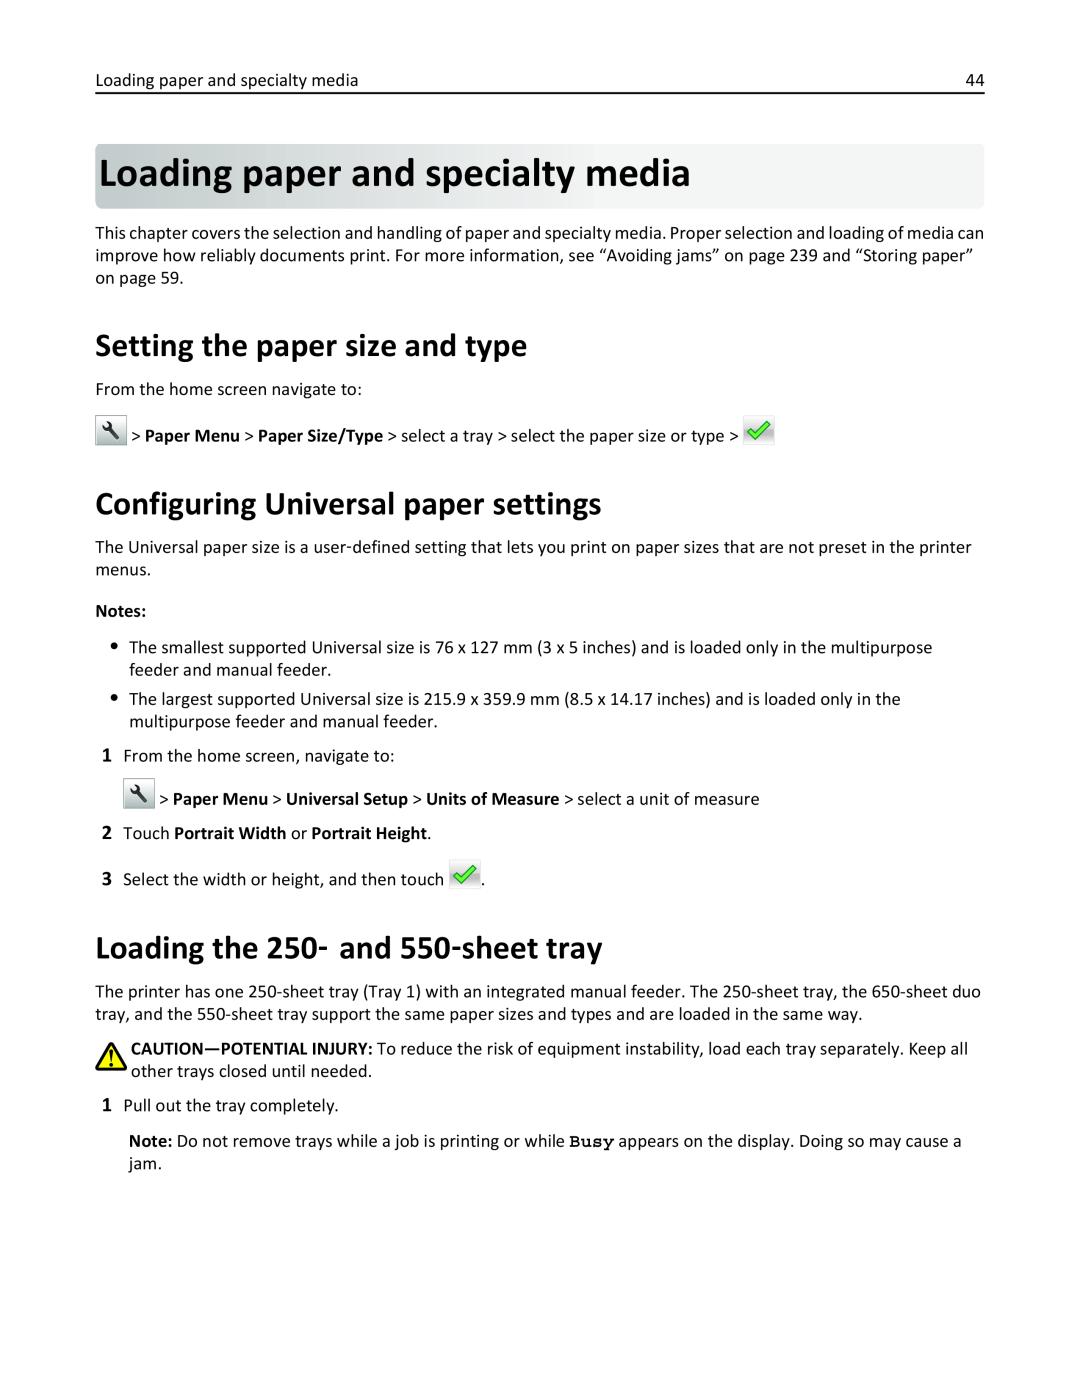 Lexmark 436 manual Loadingpaperand specialty media, Setting the paper size and type, Configuring Universal paper settings 